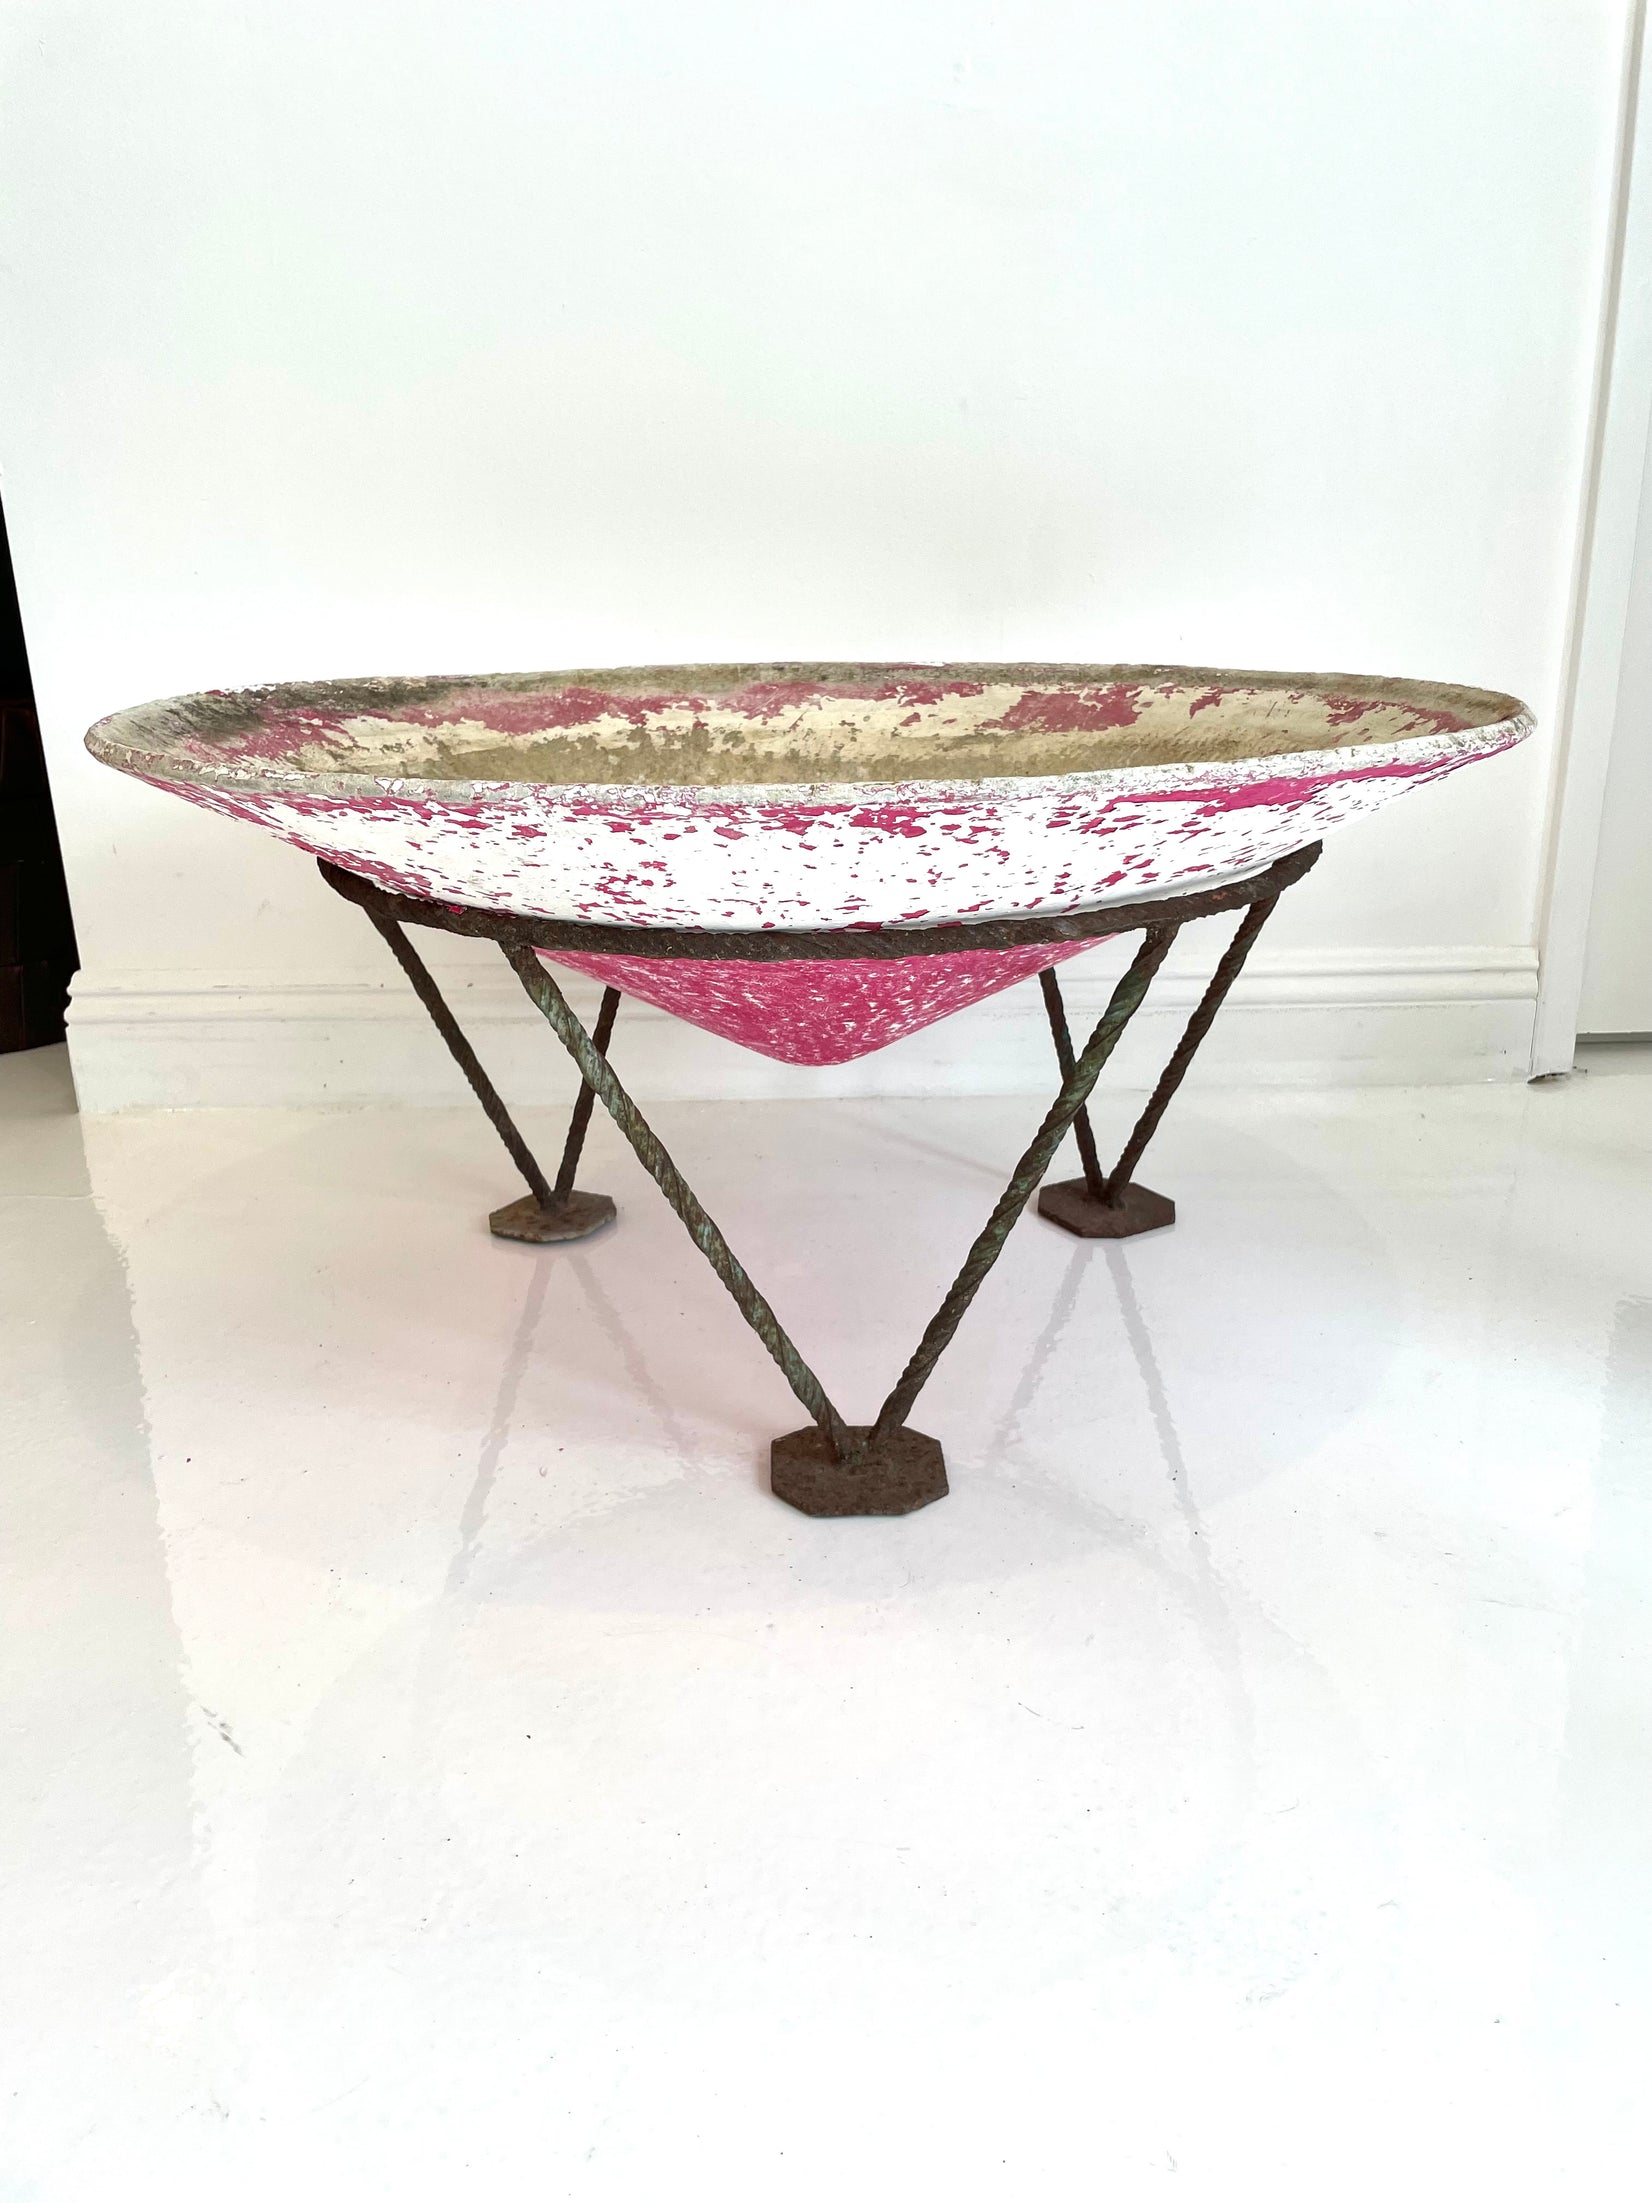 Willy Guhl Pink Concrete Cone Planter on Iron Stand